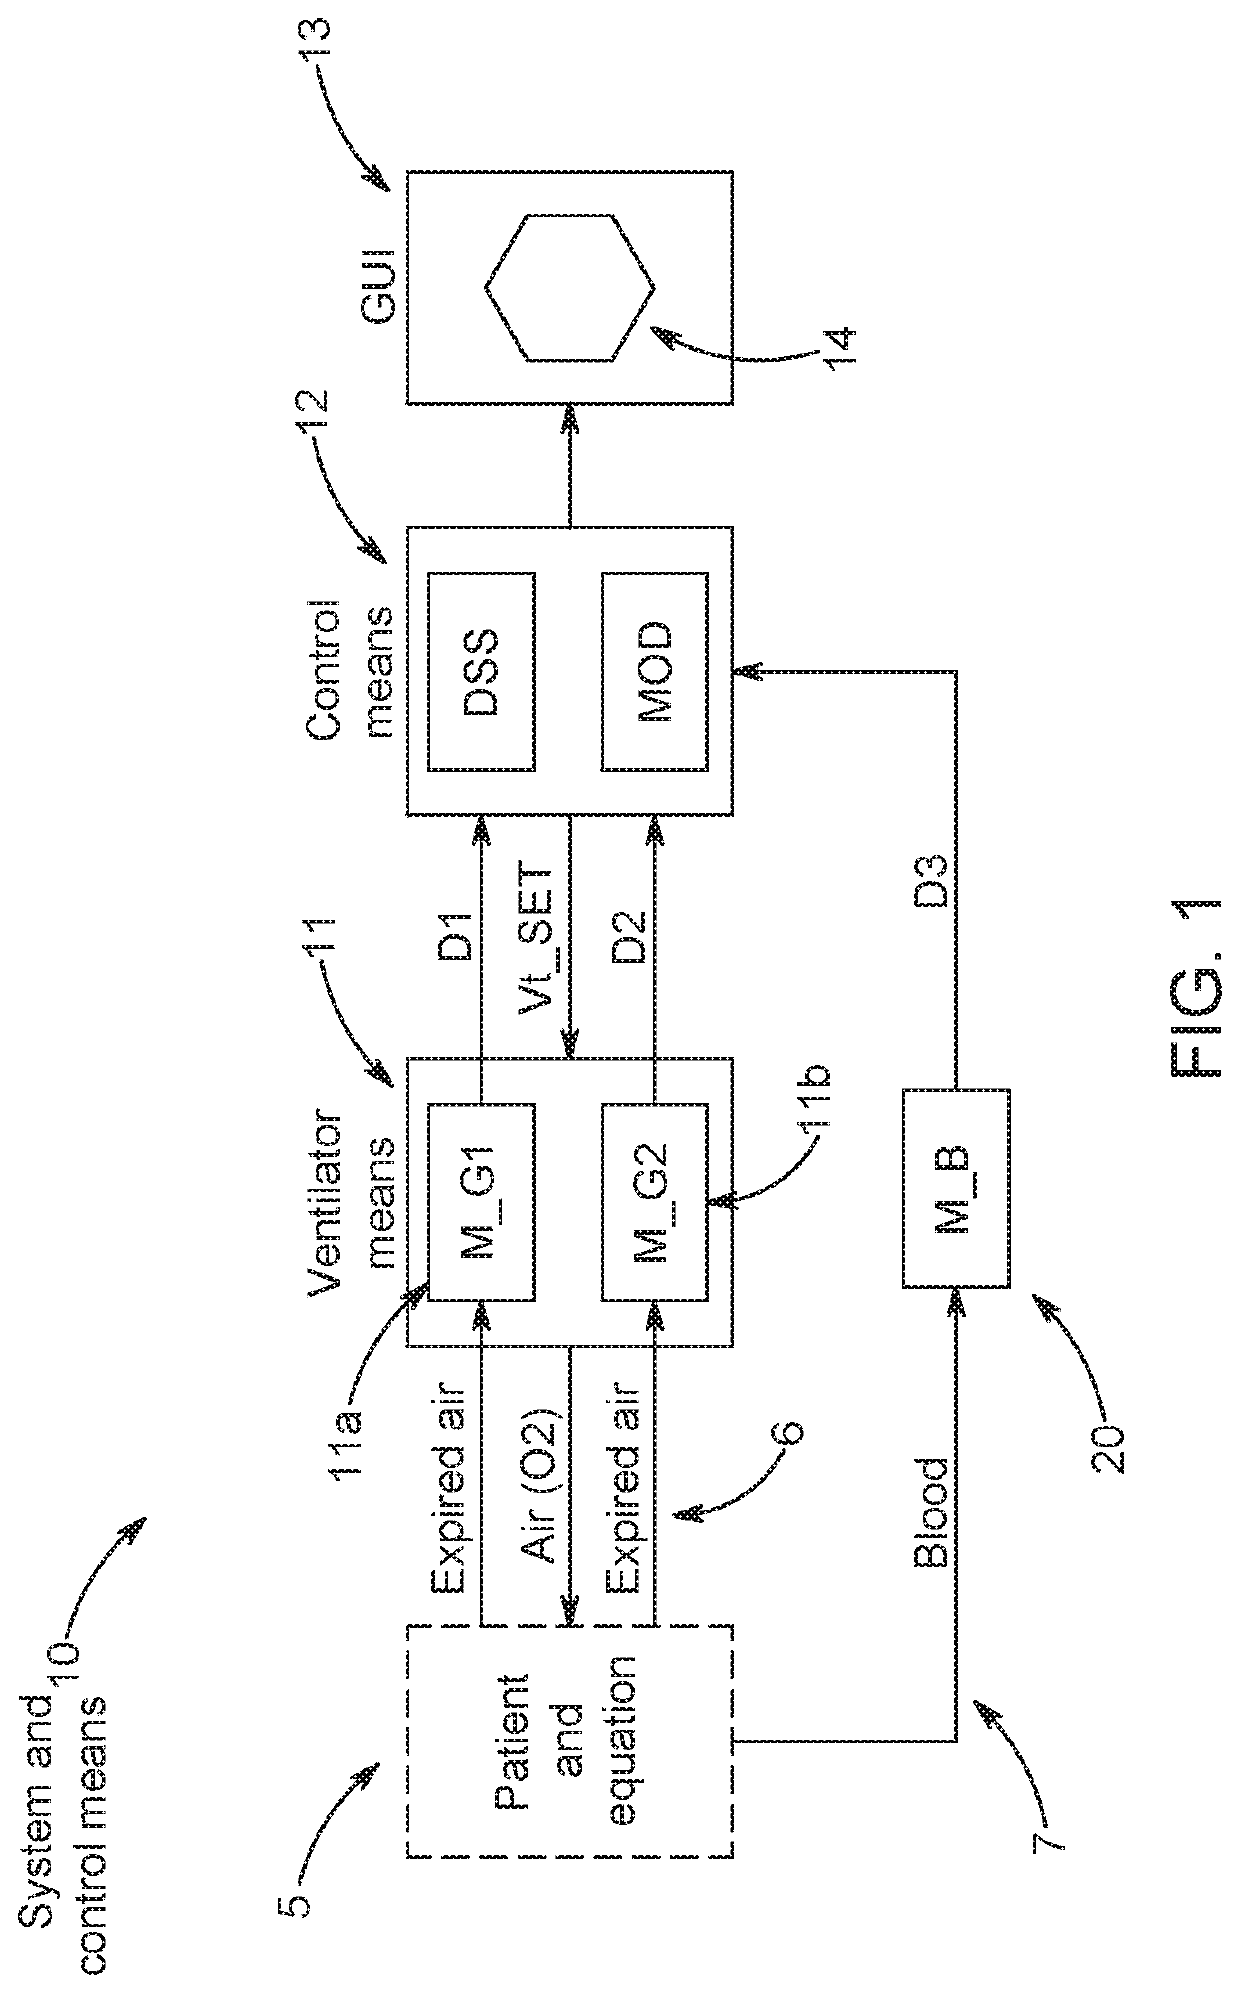 Decision support system for lung ventilator settings